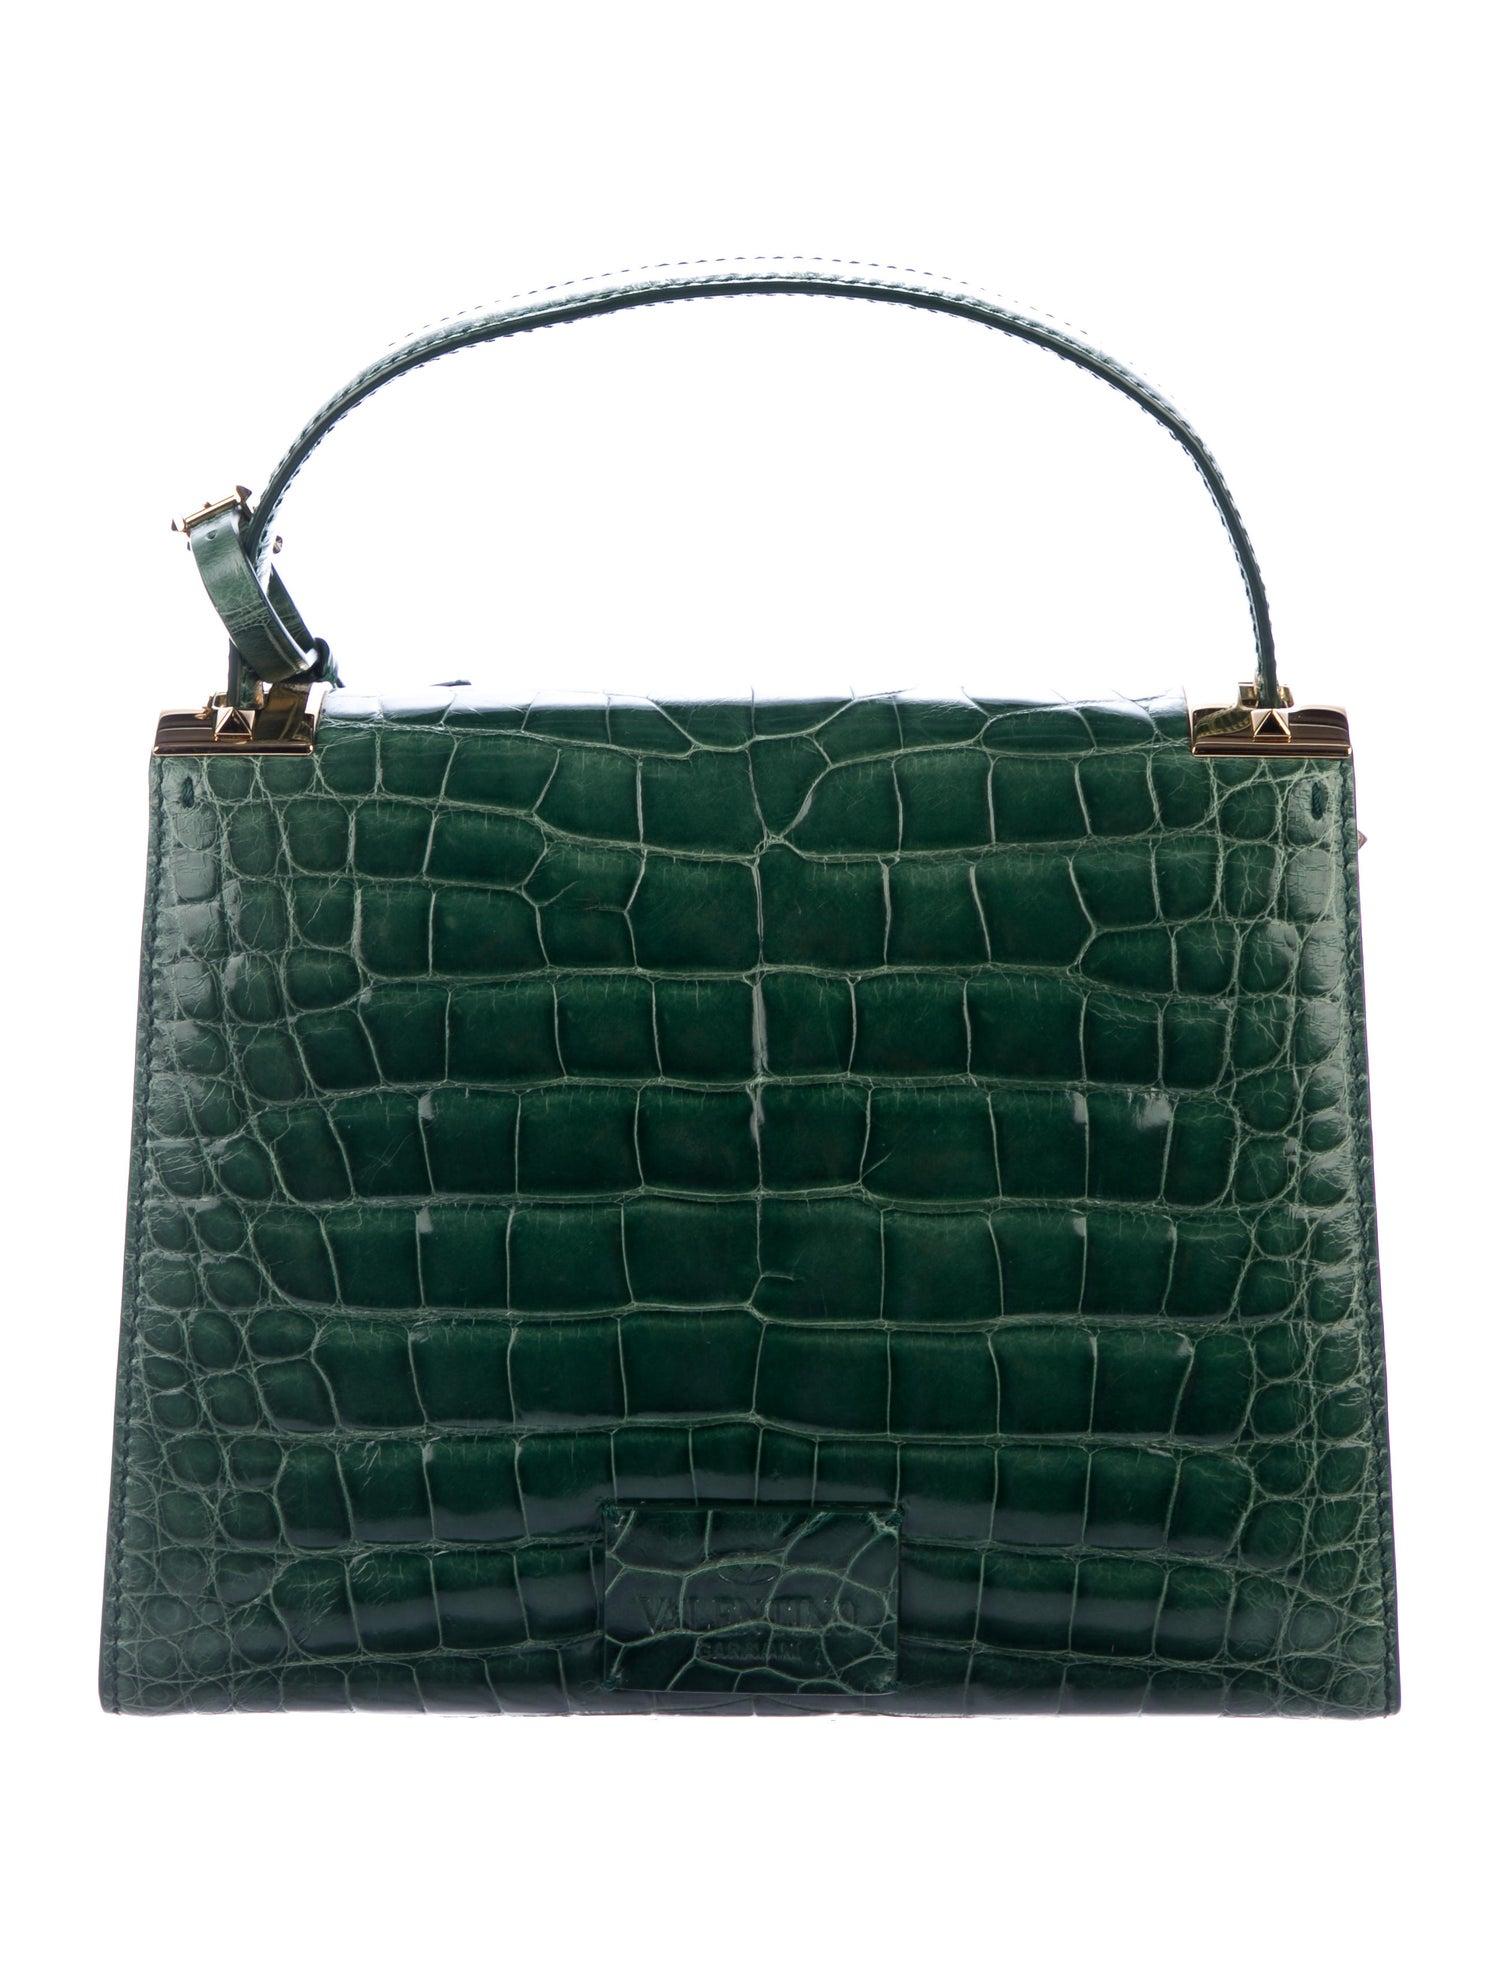 Black Valentino NEW Green Alligator Exotic Leather Gold Top Handle Kelly Style Satchel